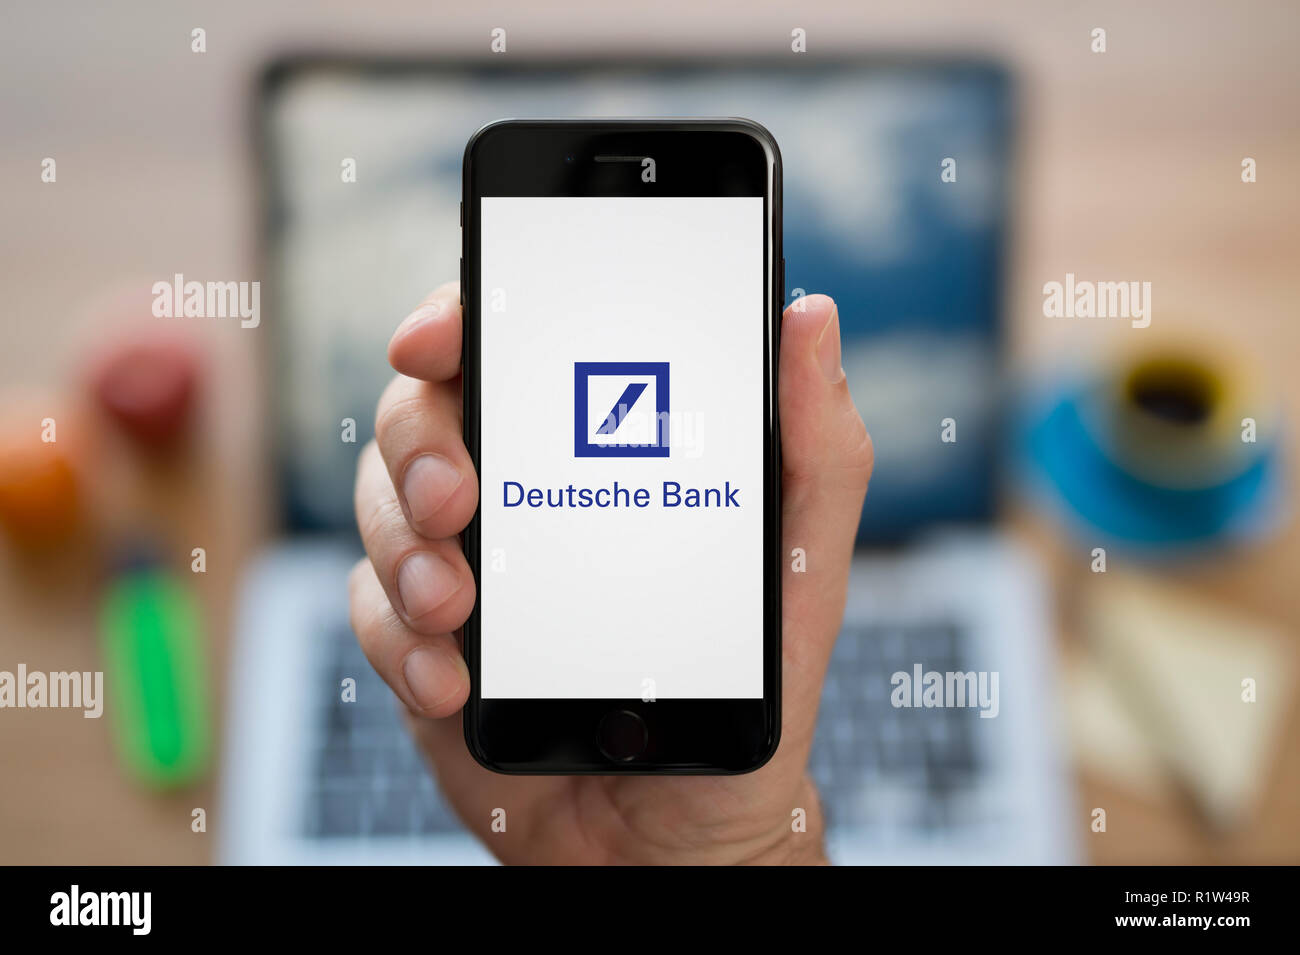 A Man Looks At His Iphone Which Displays The Deutsche Bank Logo